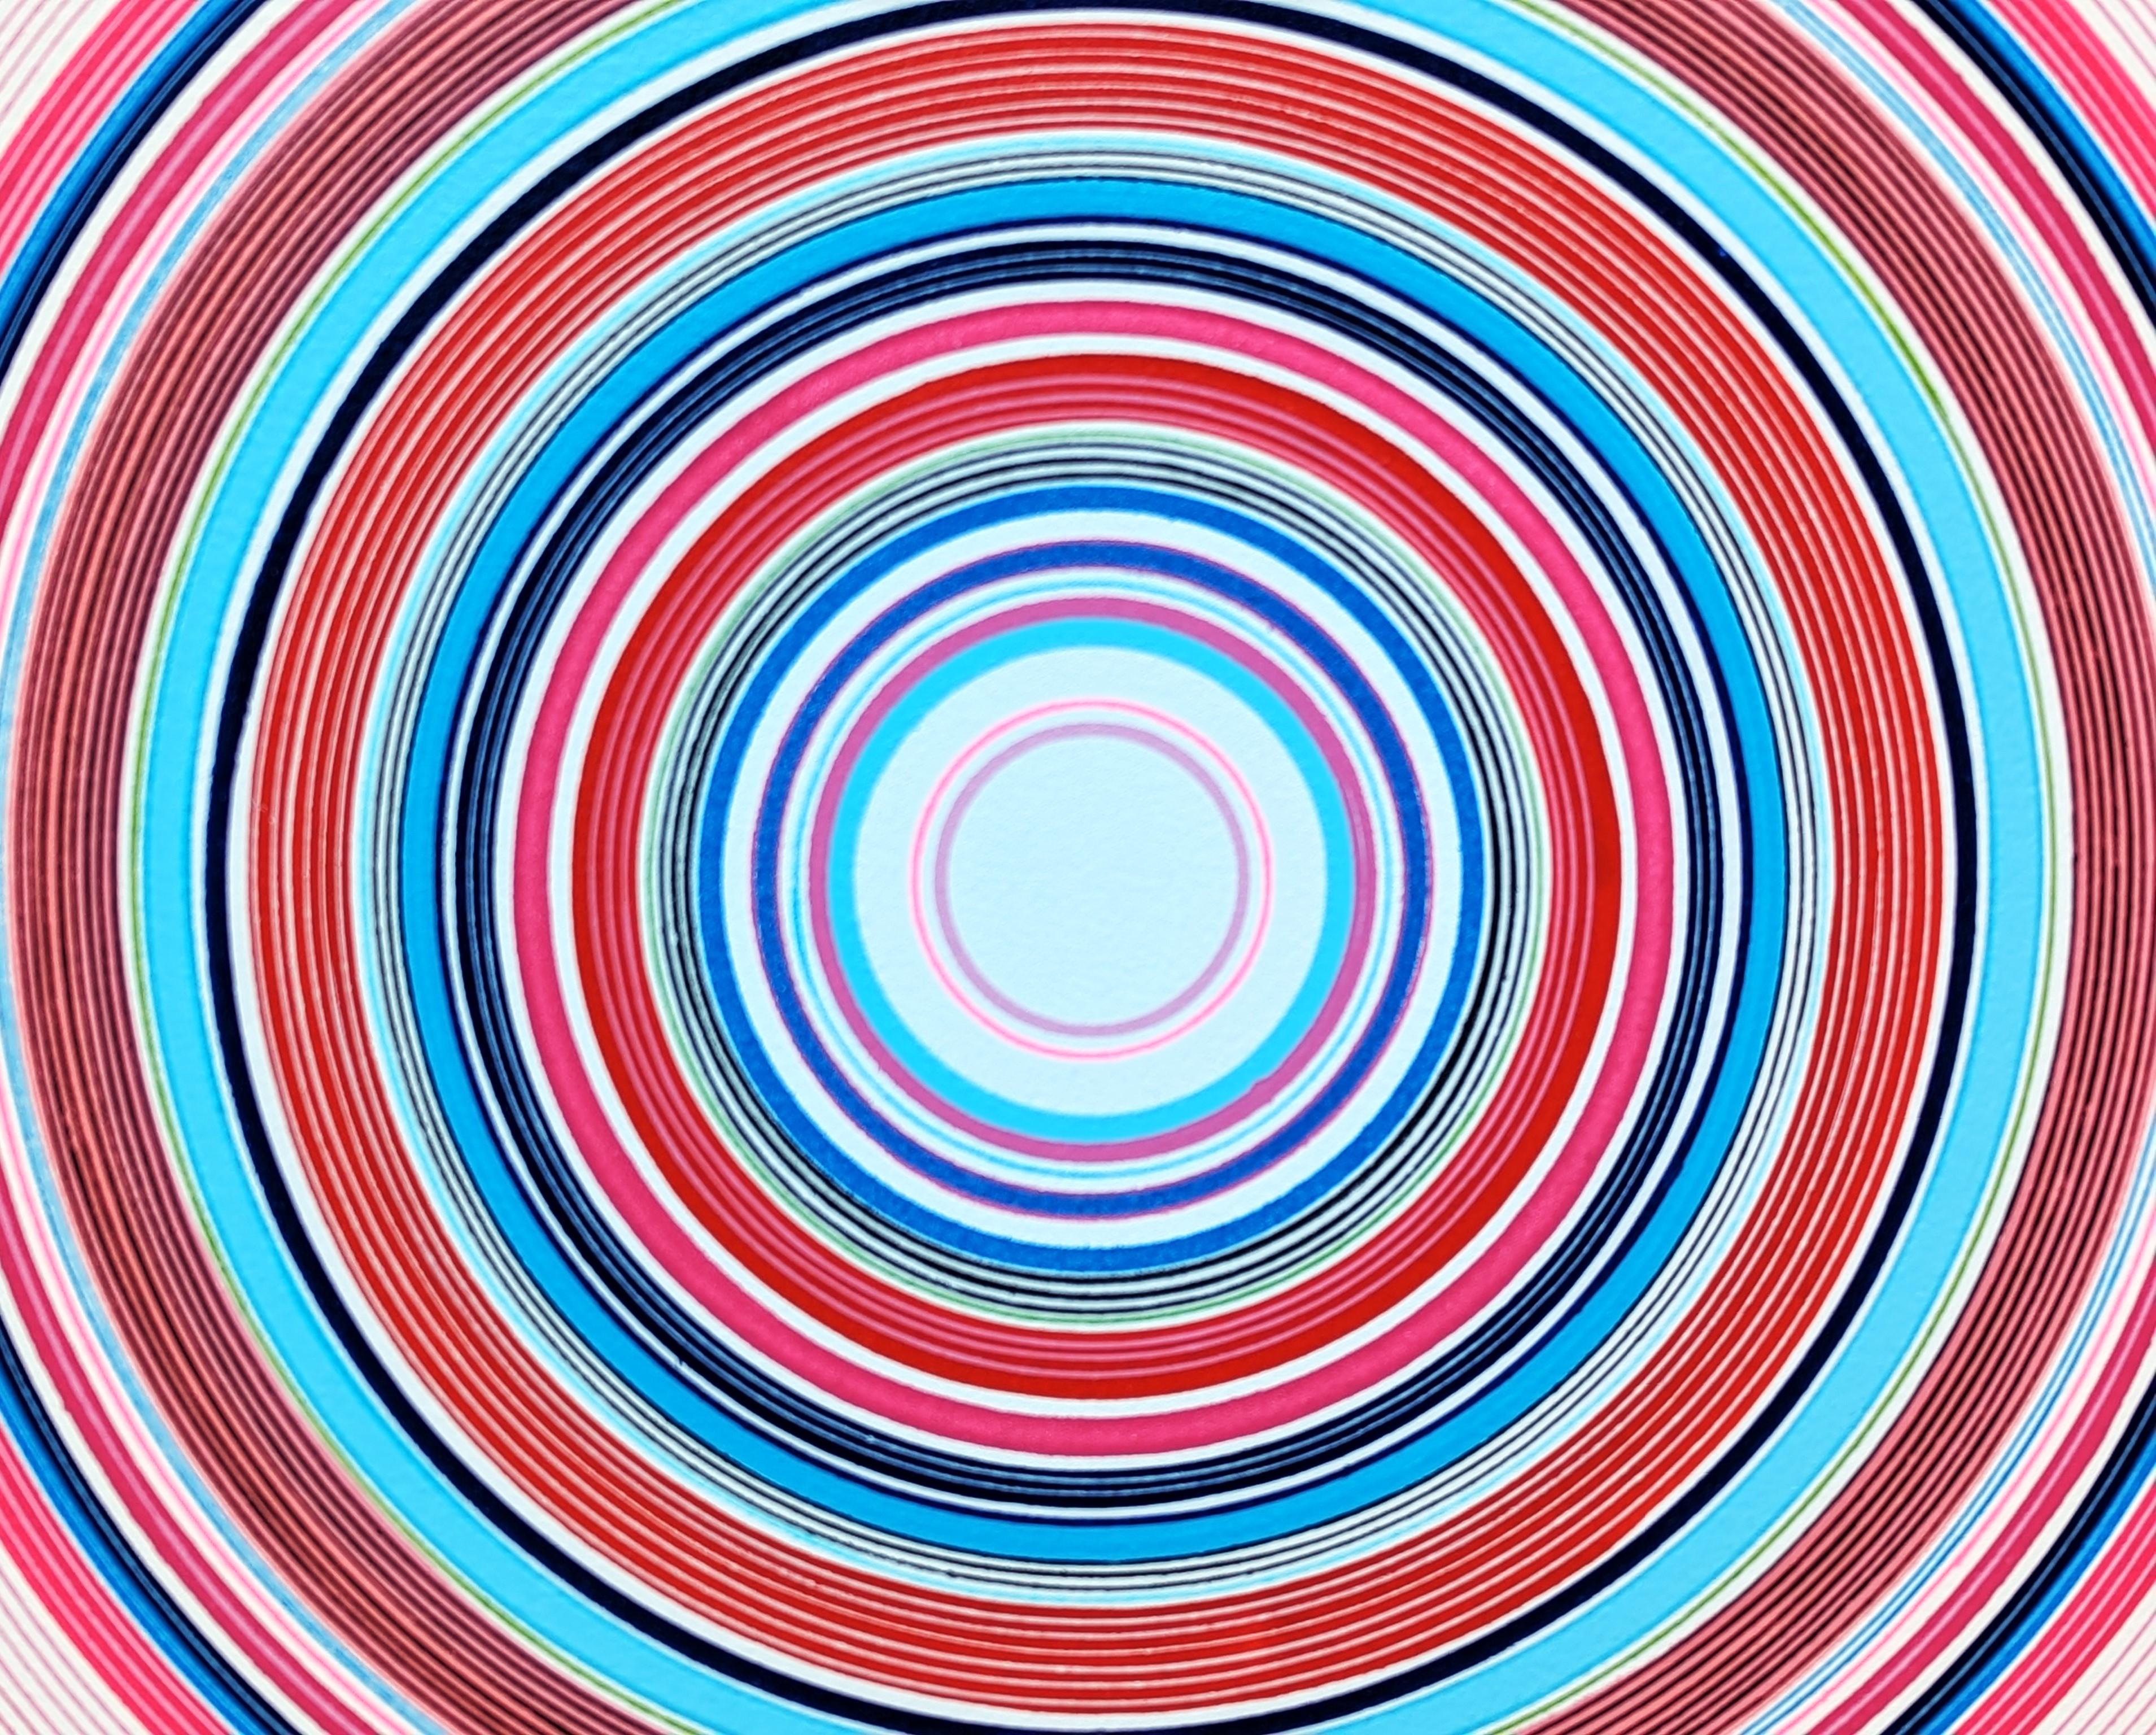 “Midnight Sun” Contemporary Pink, Blue, and Red Concentric Circle Painting 3